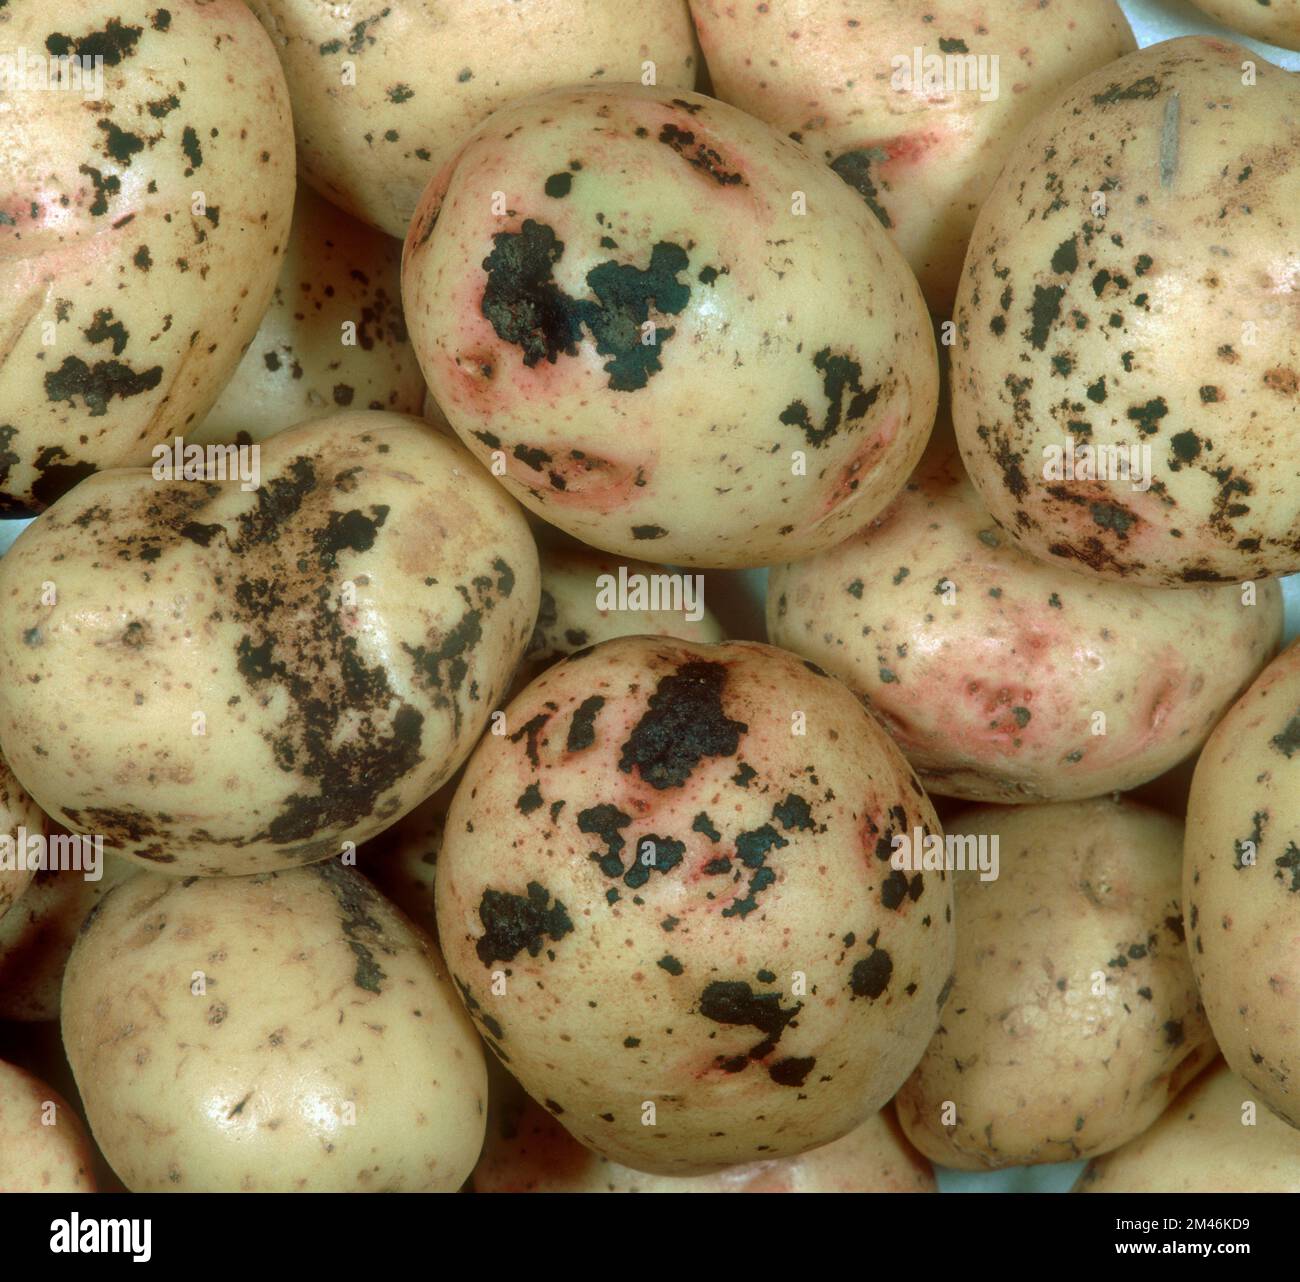 Black scurf (Rhizoctonia solani) fungal disease black canker lesions on the surface of potato tubers Stock Photo